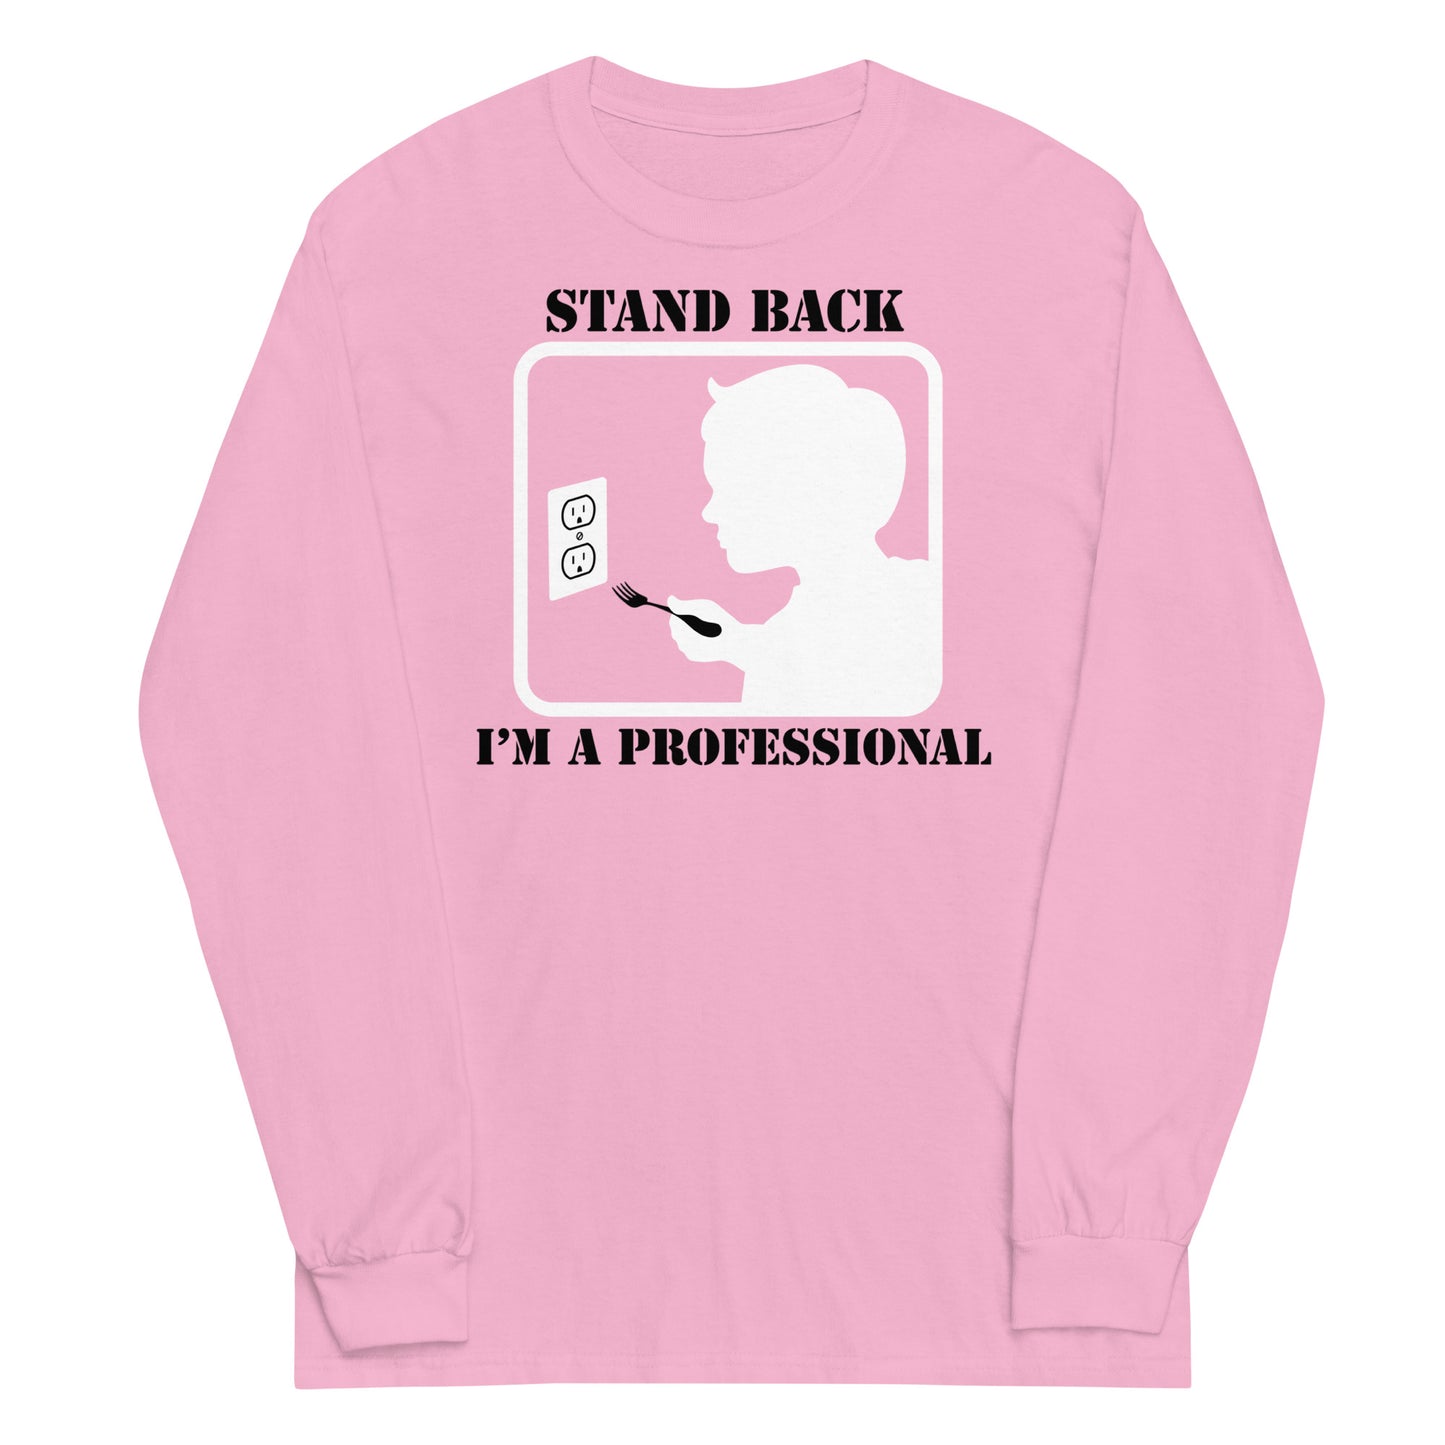 Stand Back, I'm A Professional Unisex Long Sleeve Tee